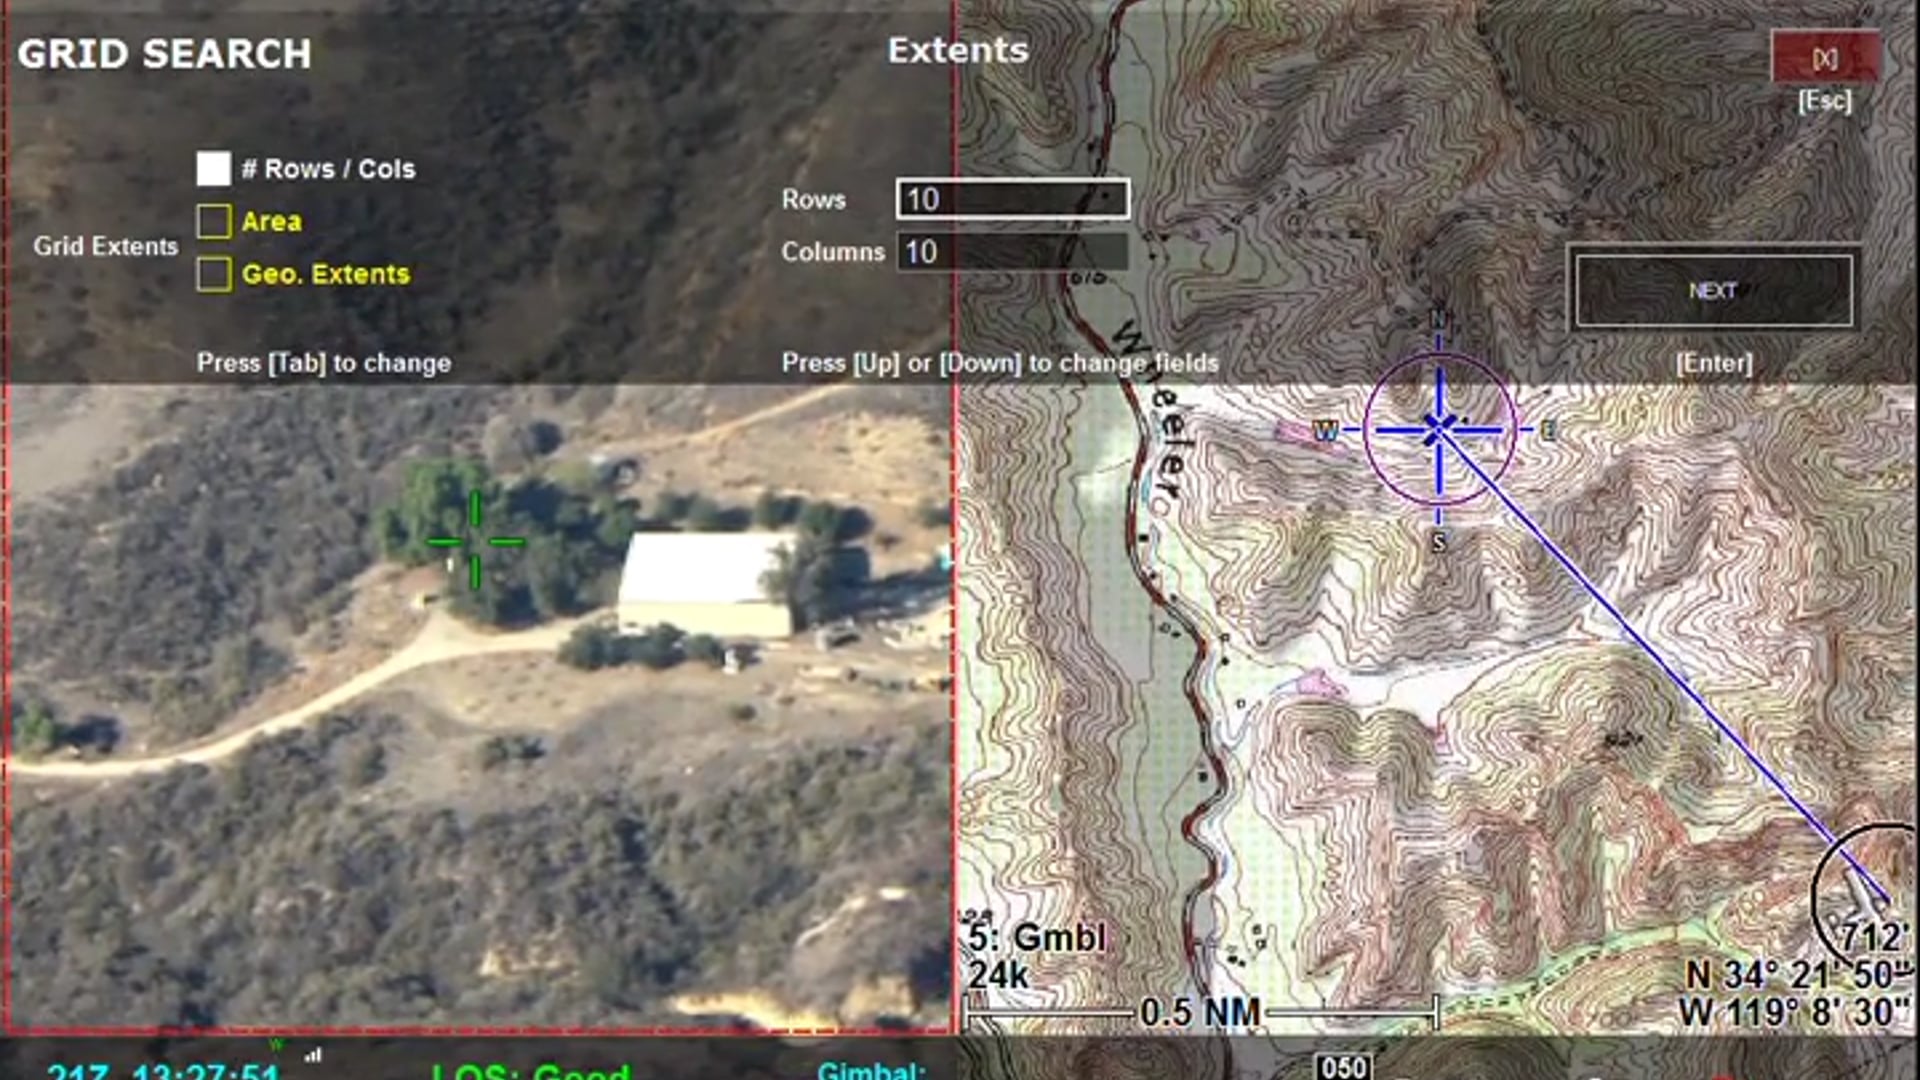 Grid Search with Complex Terrain